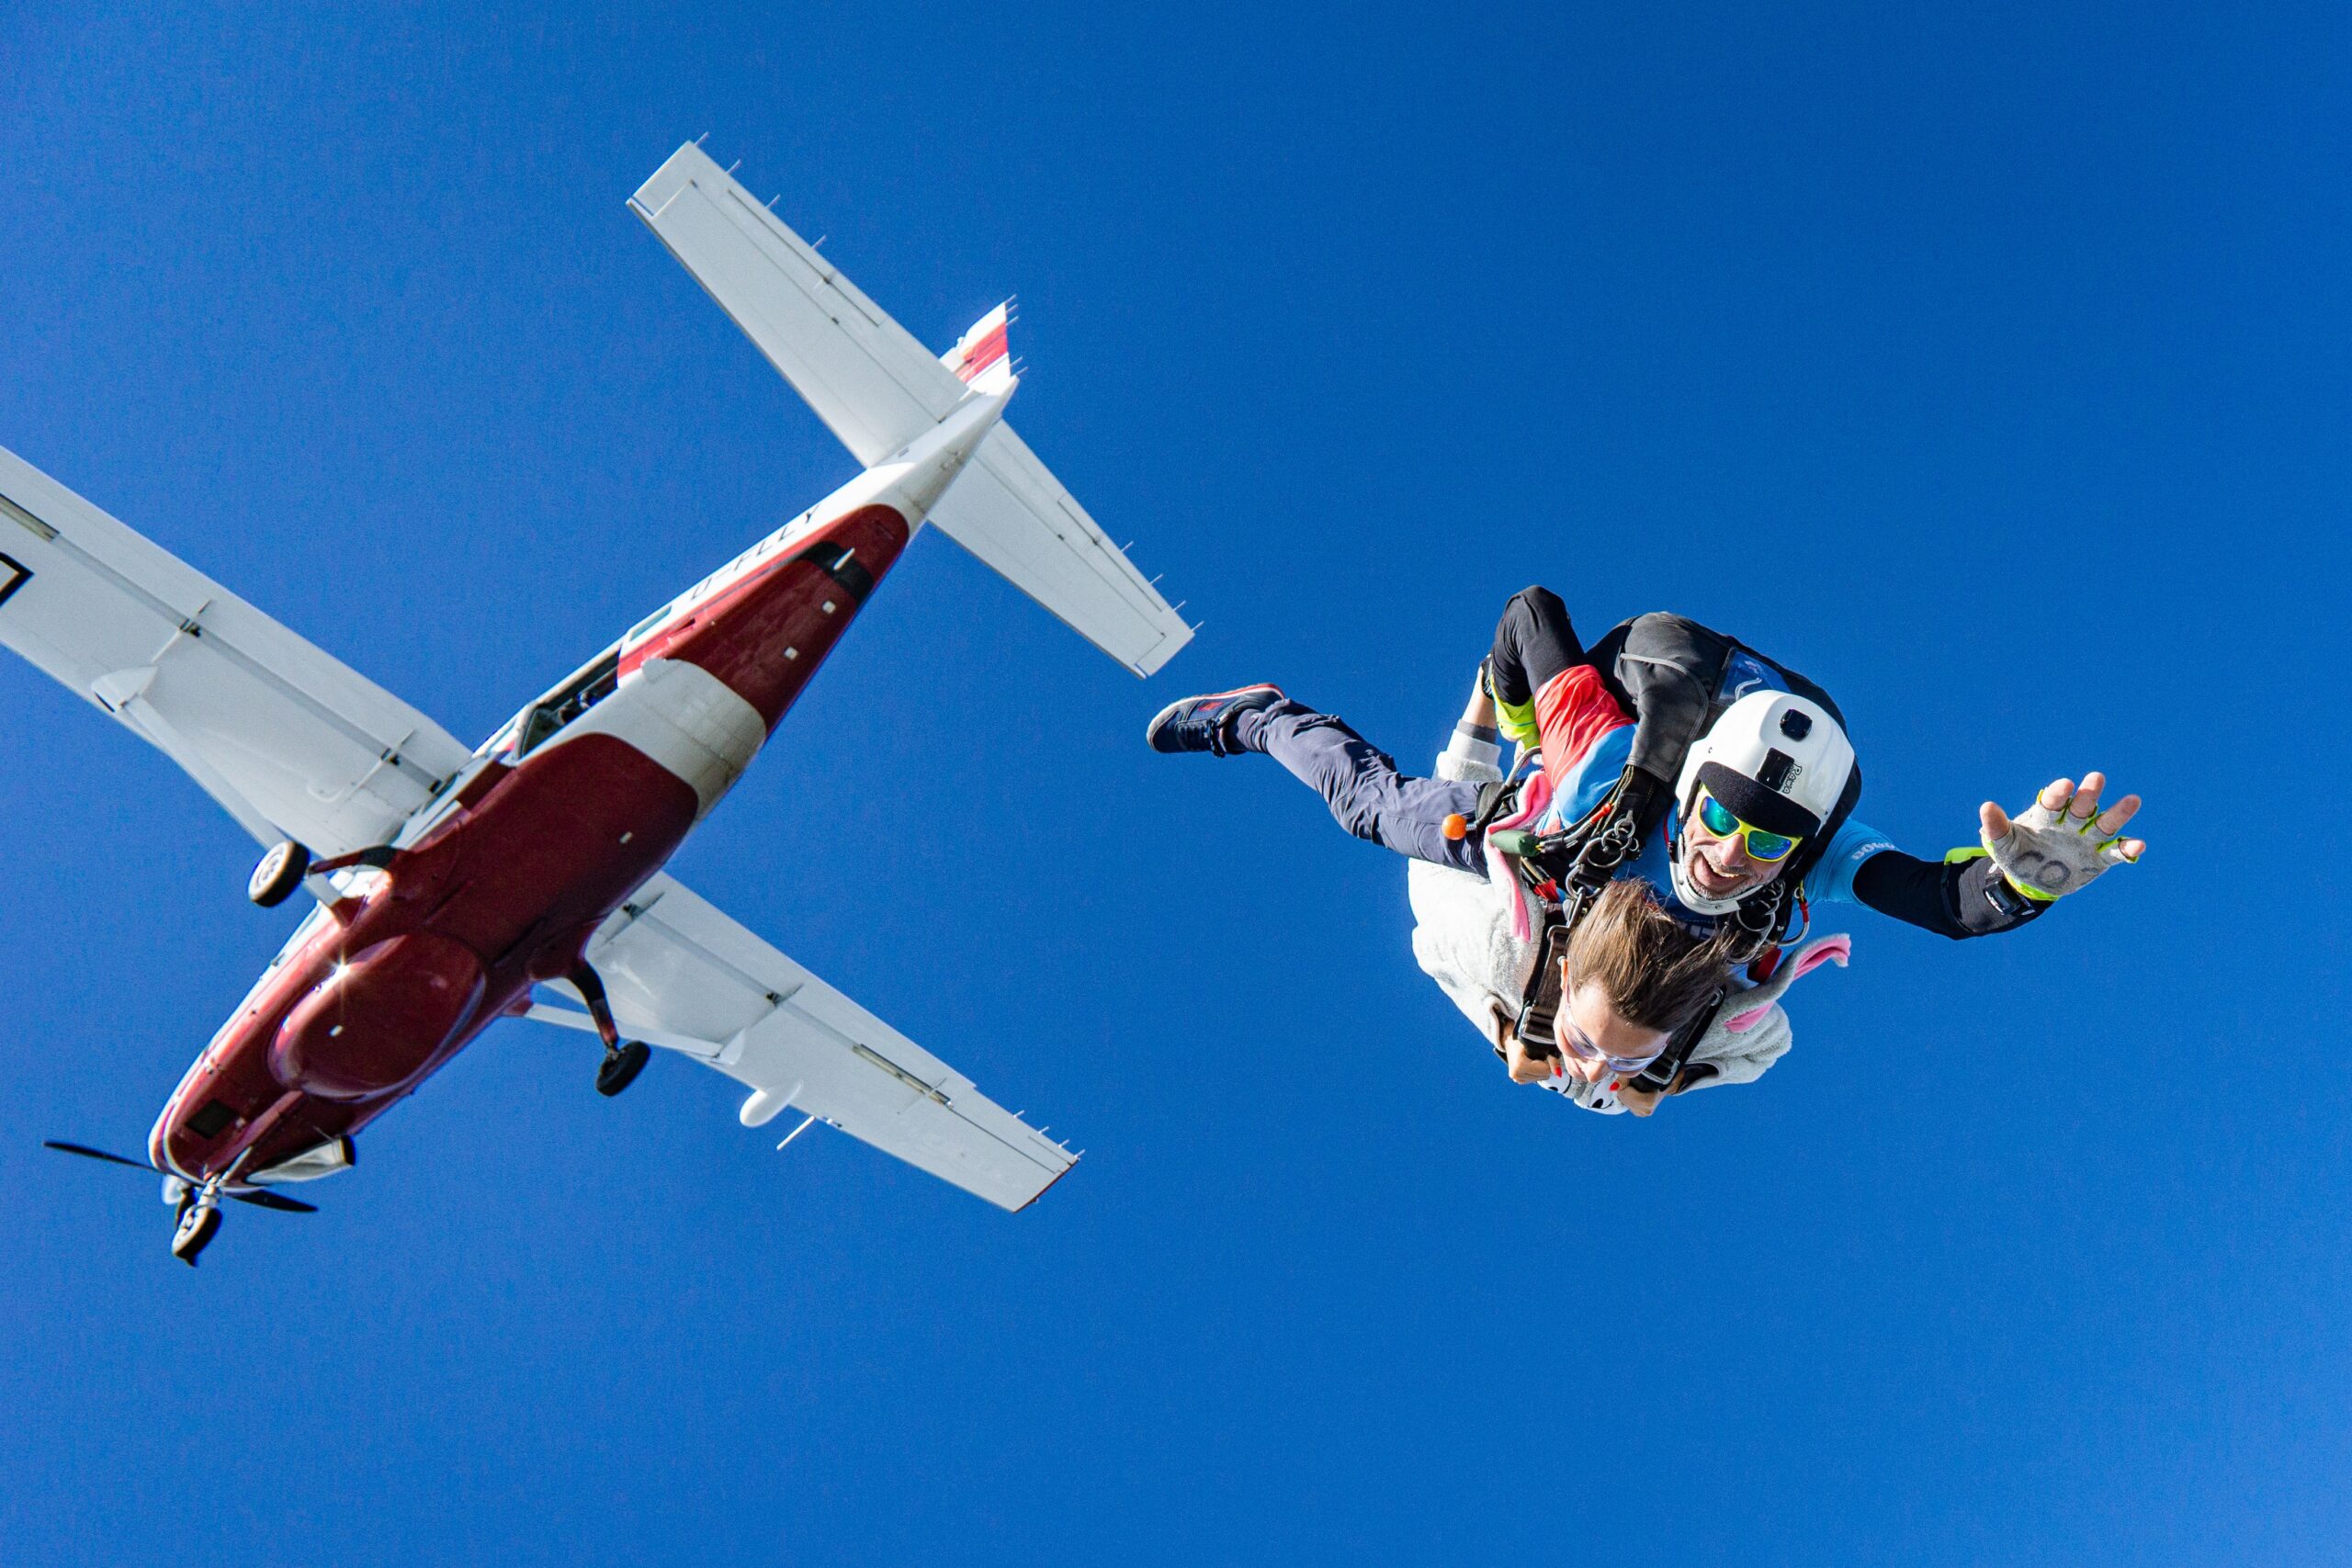 Skydiving Experience